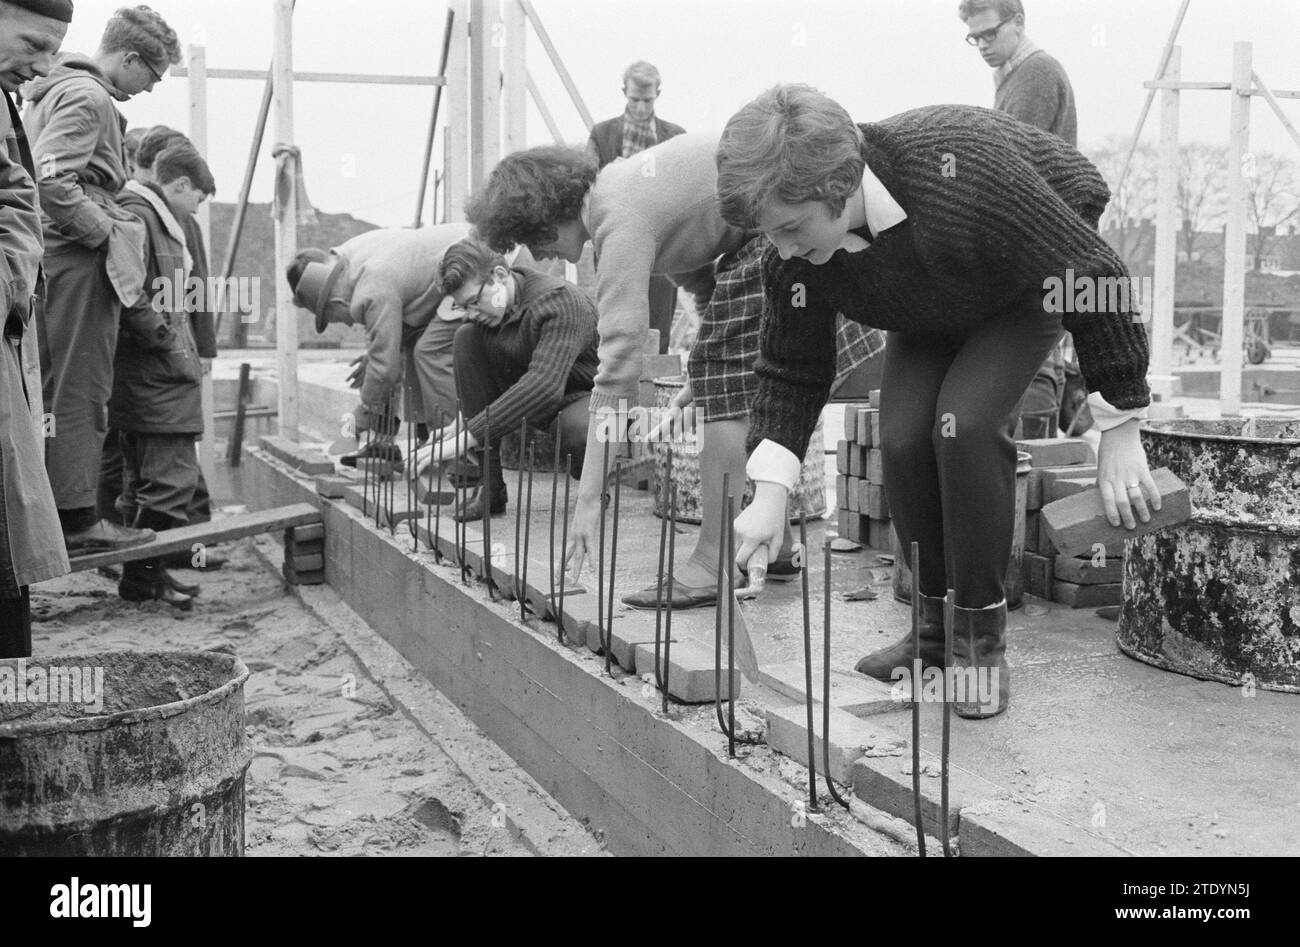 Pupils laying first bricks Youth Building North on Meeuwenlaan, pupils laying bricks ca. December 21, 1962 Stock Photo